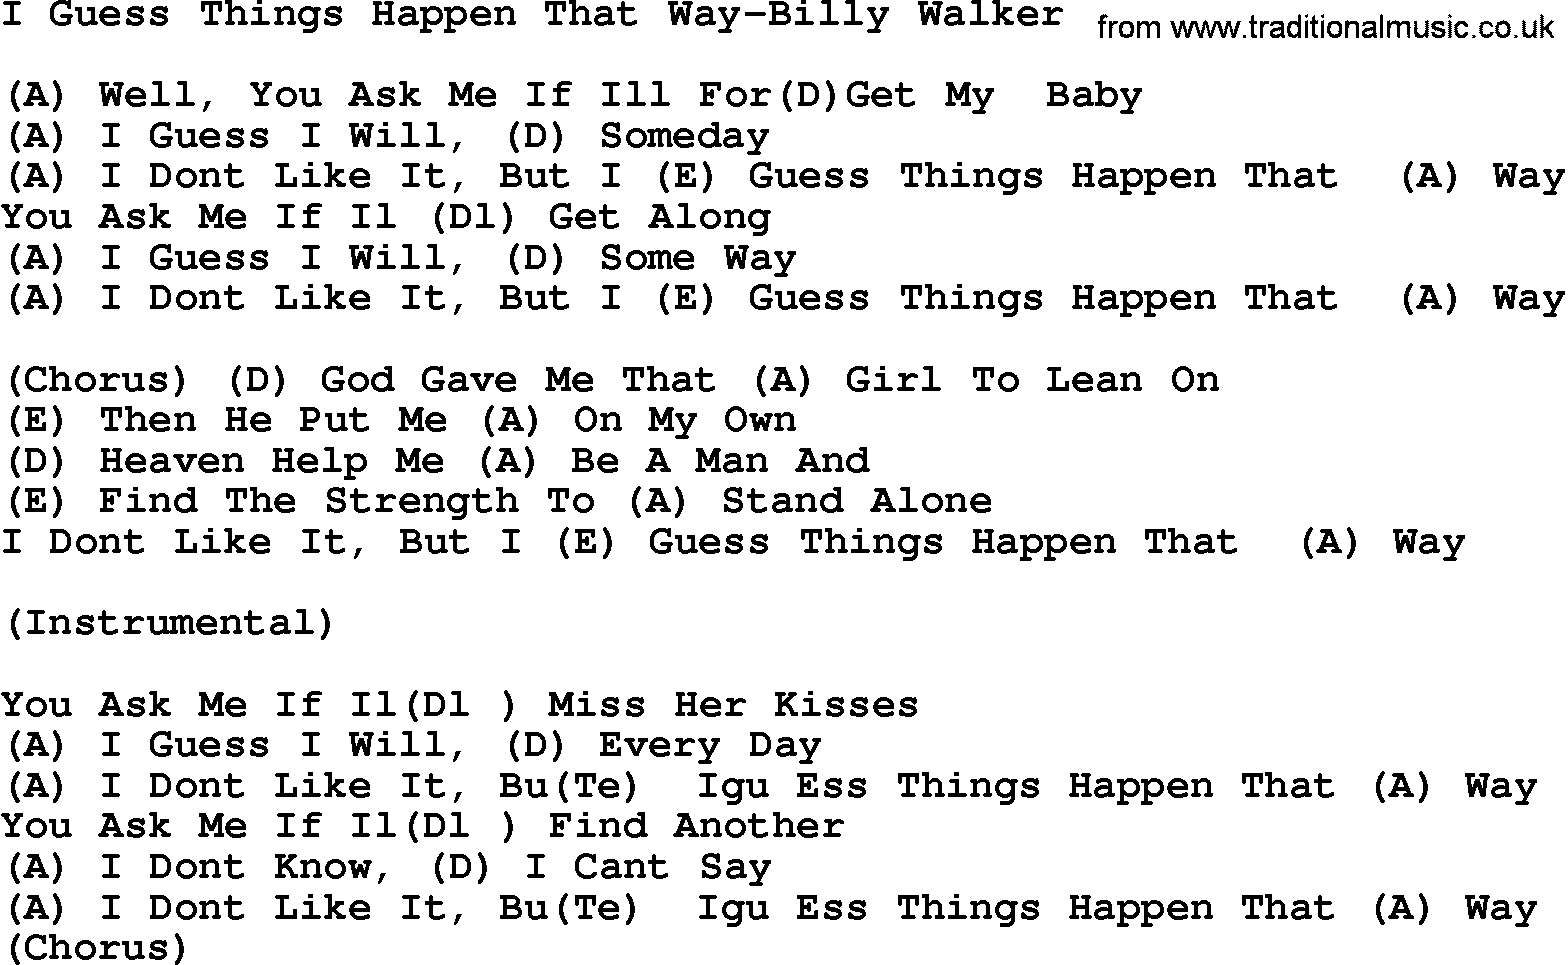 Country music song: I Guess Things Happen That Way-Billy Walker lyrics and chords